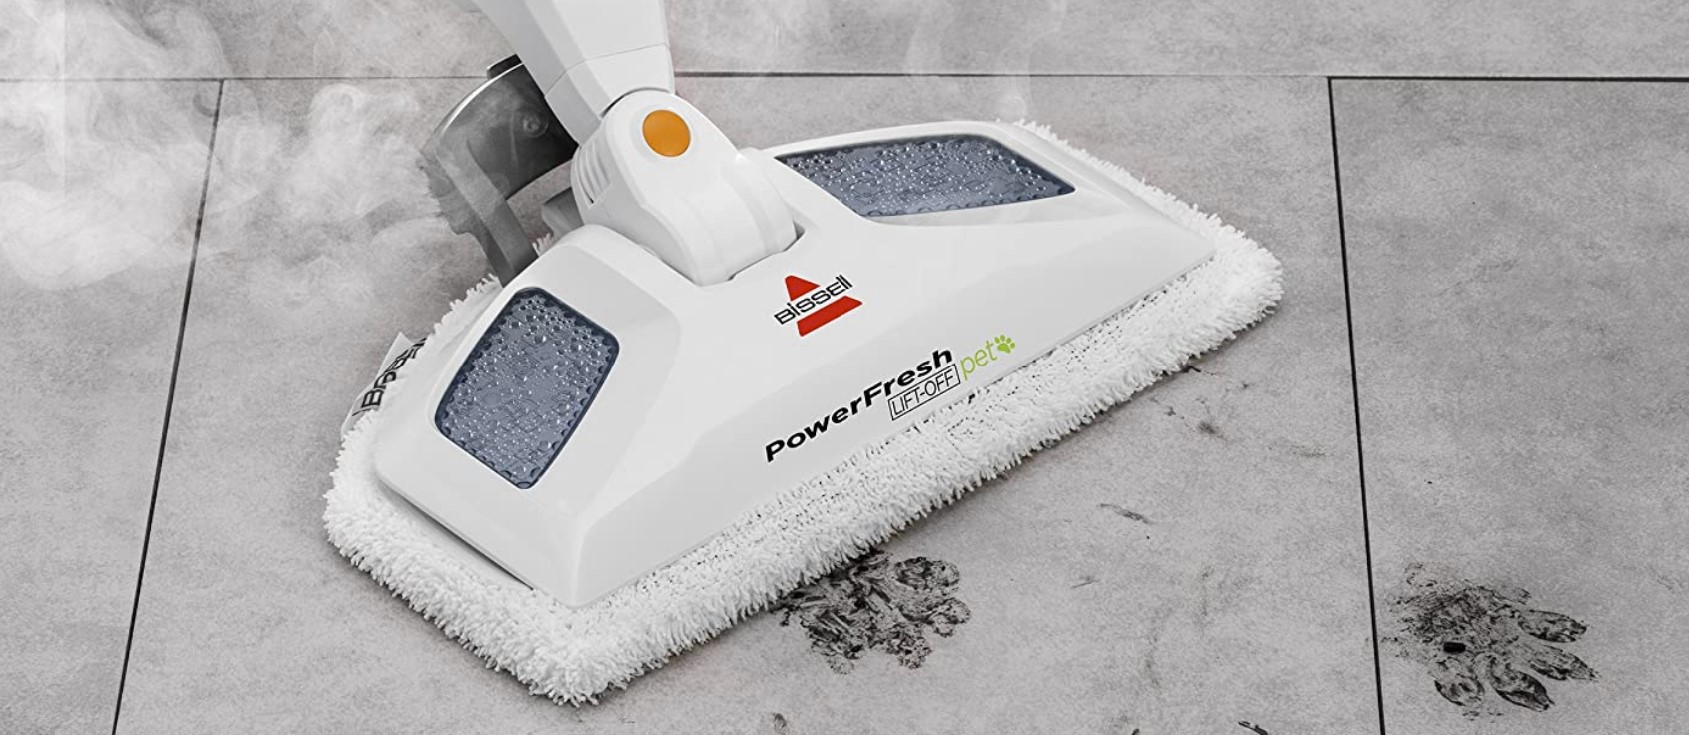 7 Best Tile Floors And Grout Steam Mops Reviews 2020